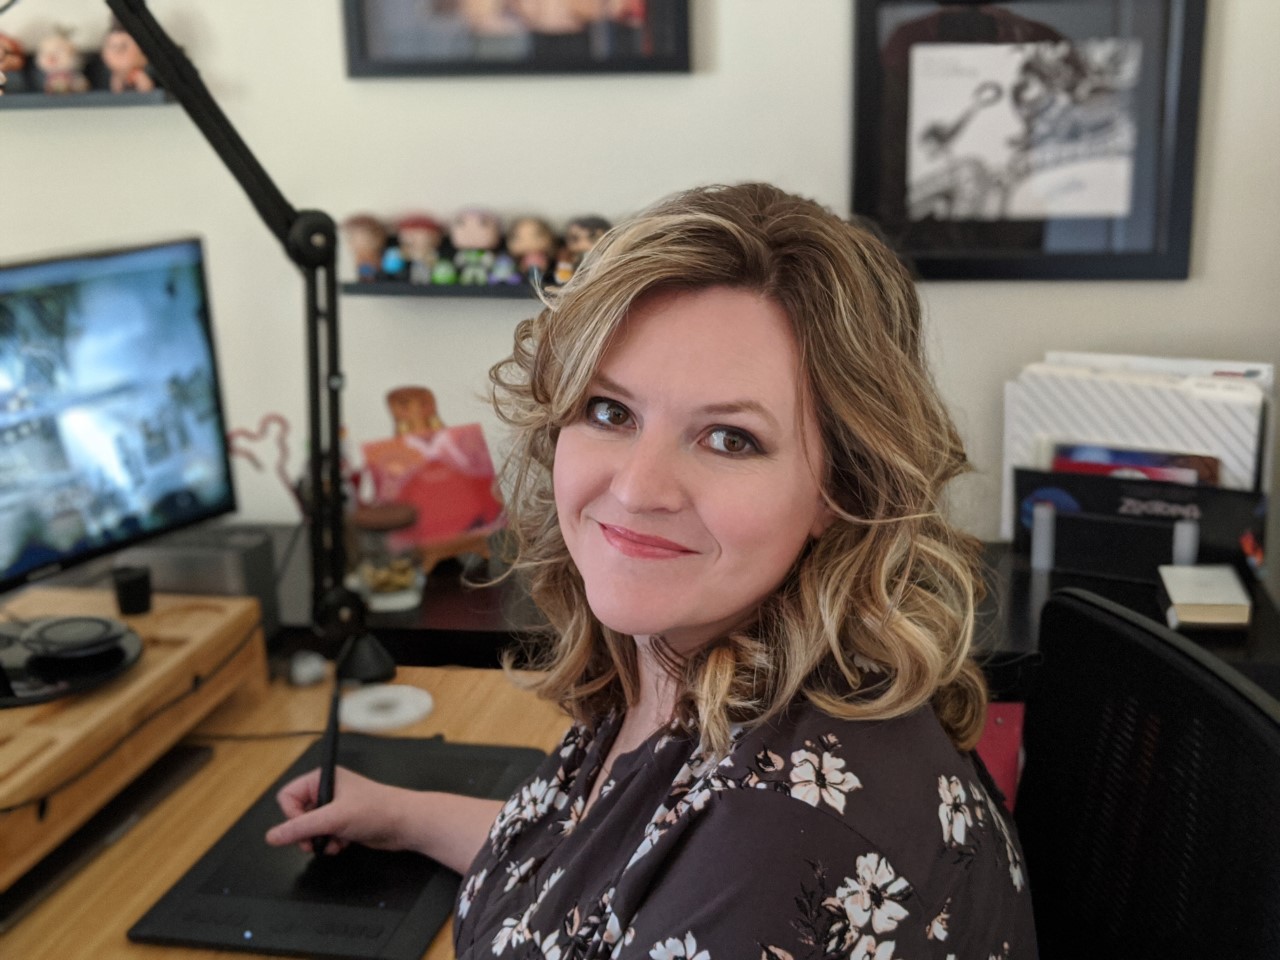 Senior matte painter Heather Abels works at her Clarksville home office. She worked as set extension artist on “Frozen II,” which hit theaters nationwide on Nov. 22.